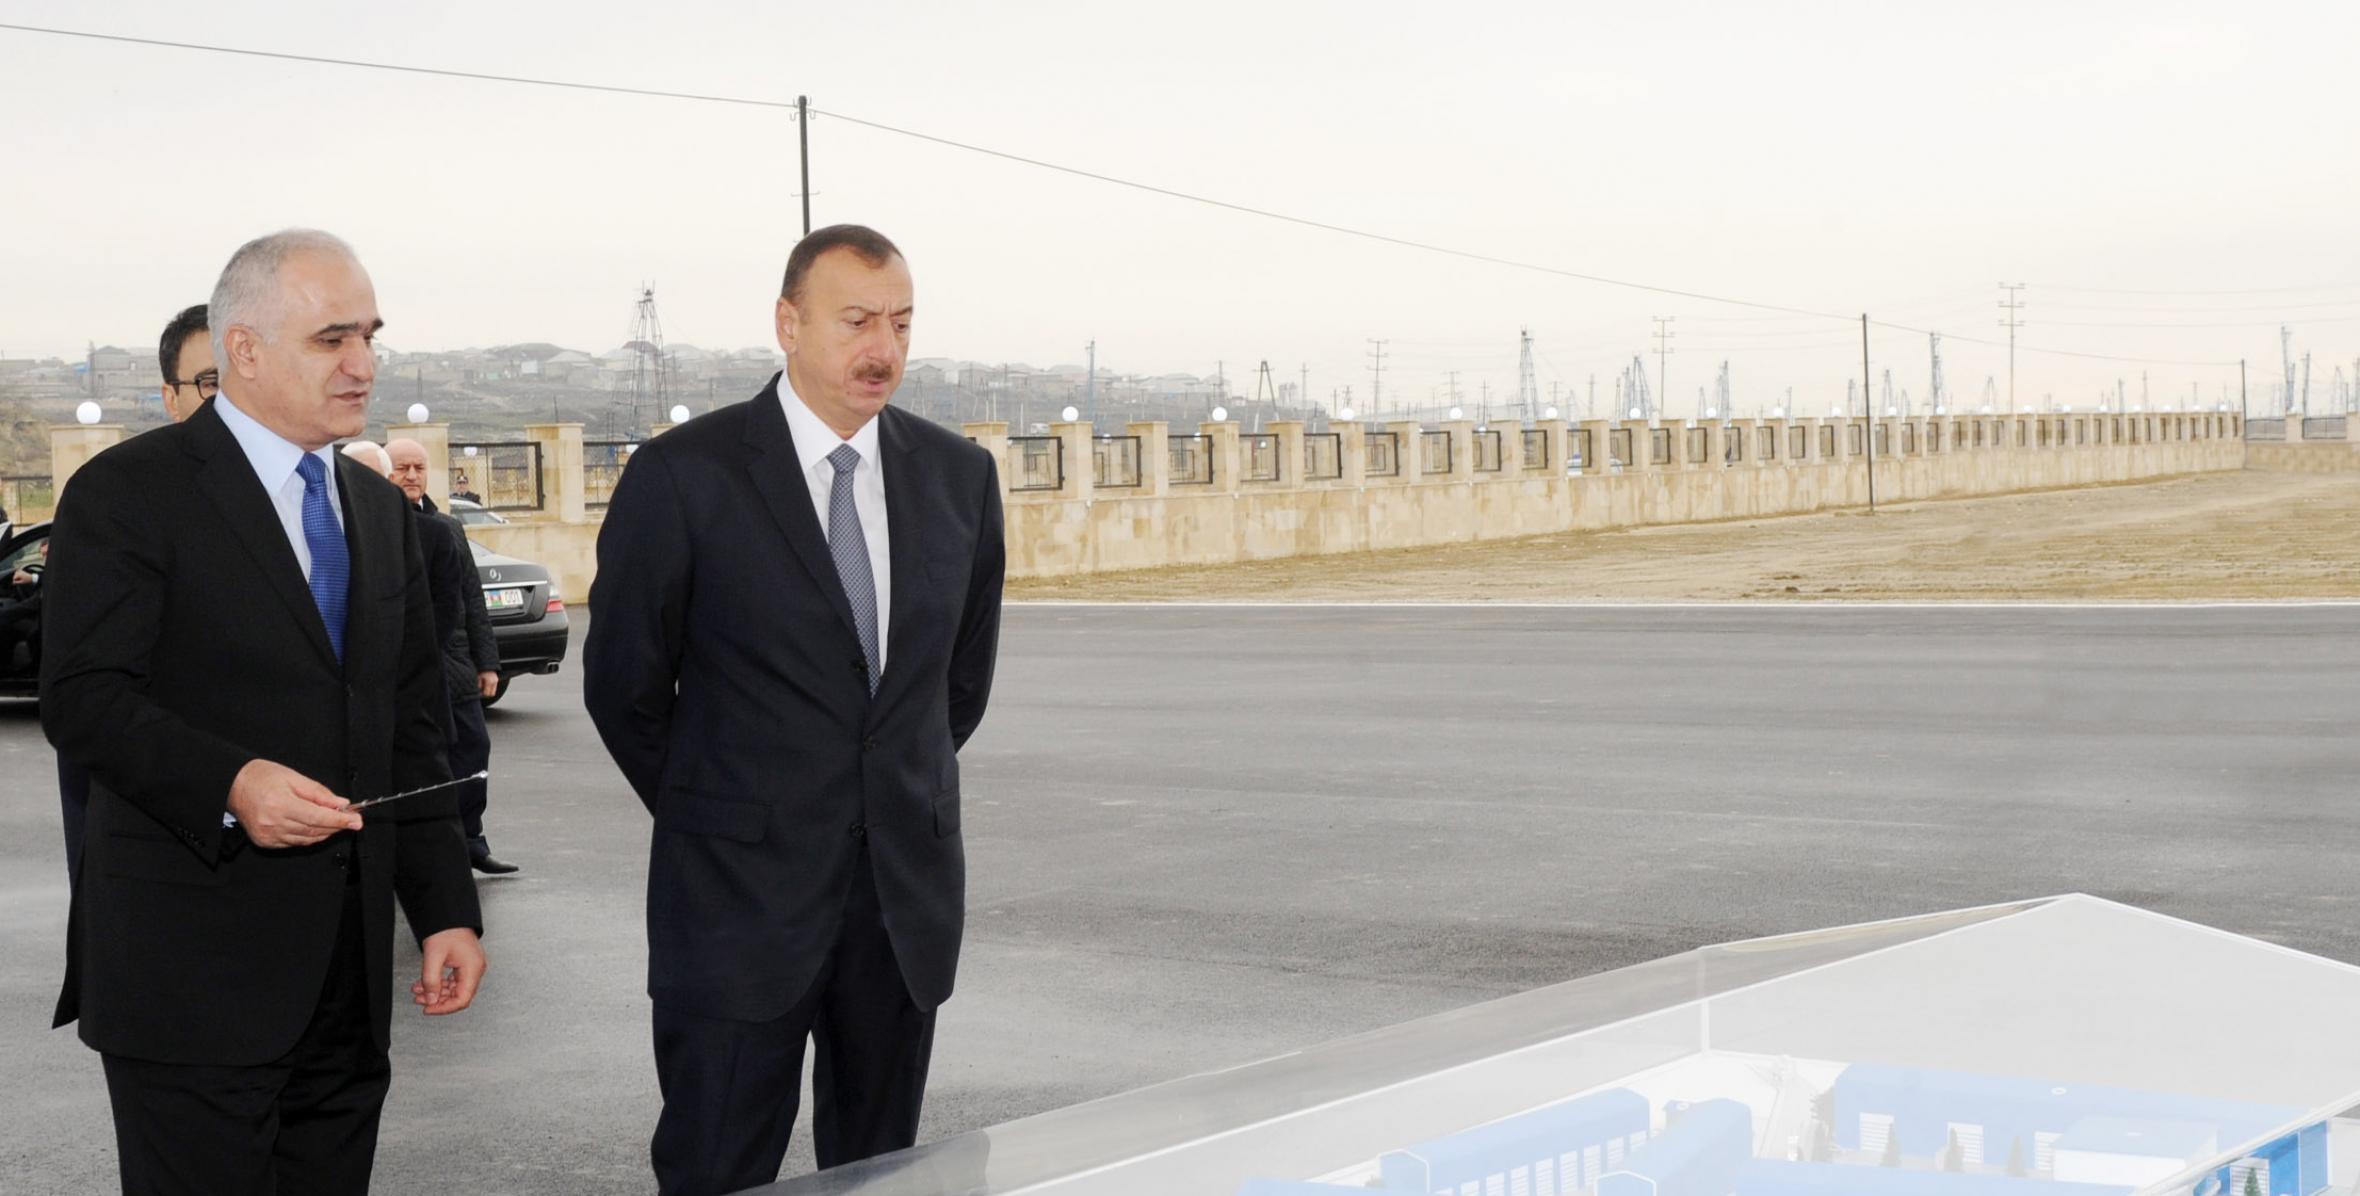 Ilham Aliyev attended the opening ceremony of Balakhany industrial park